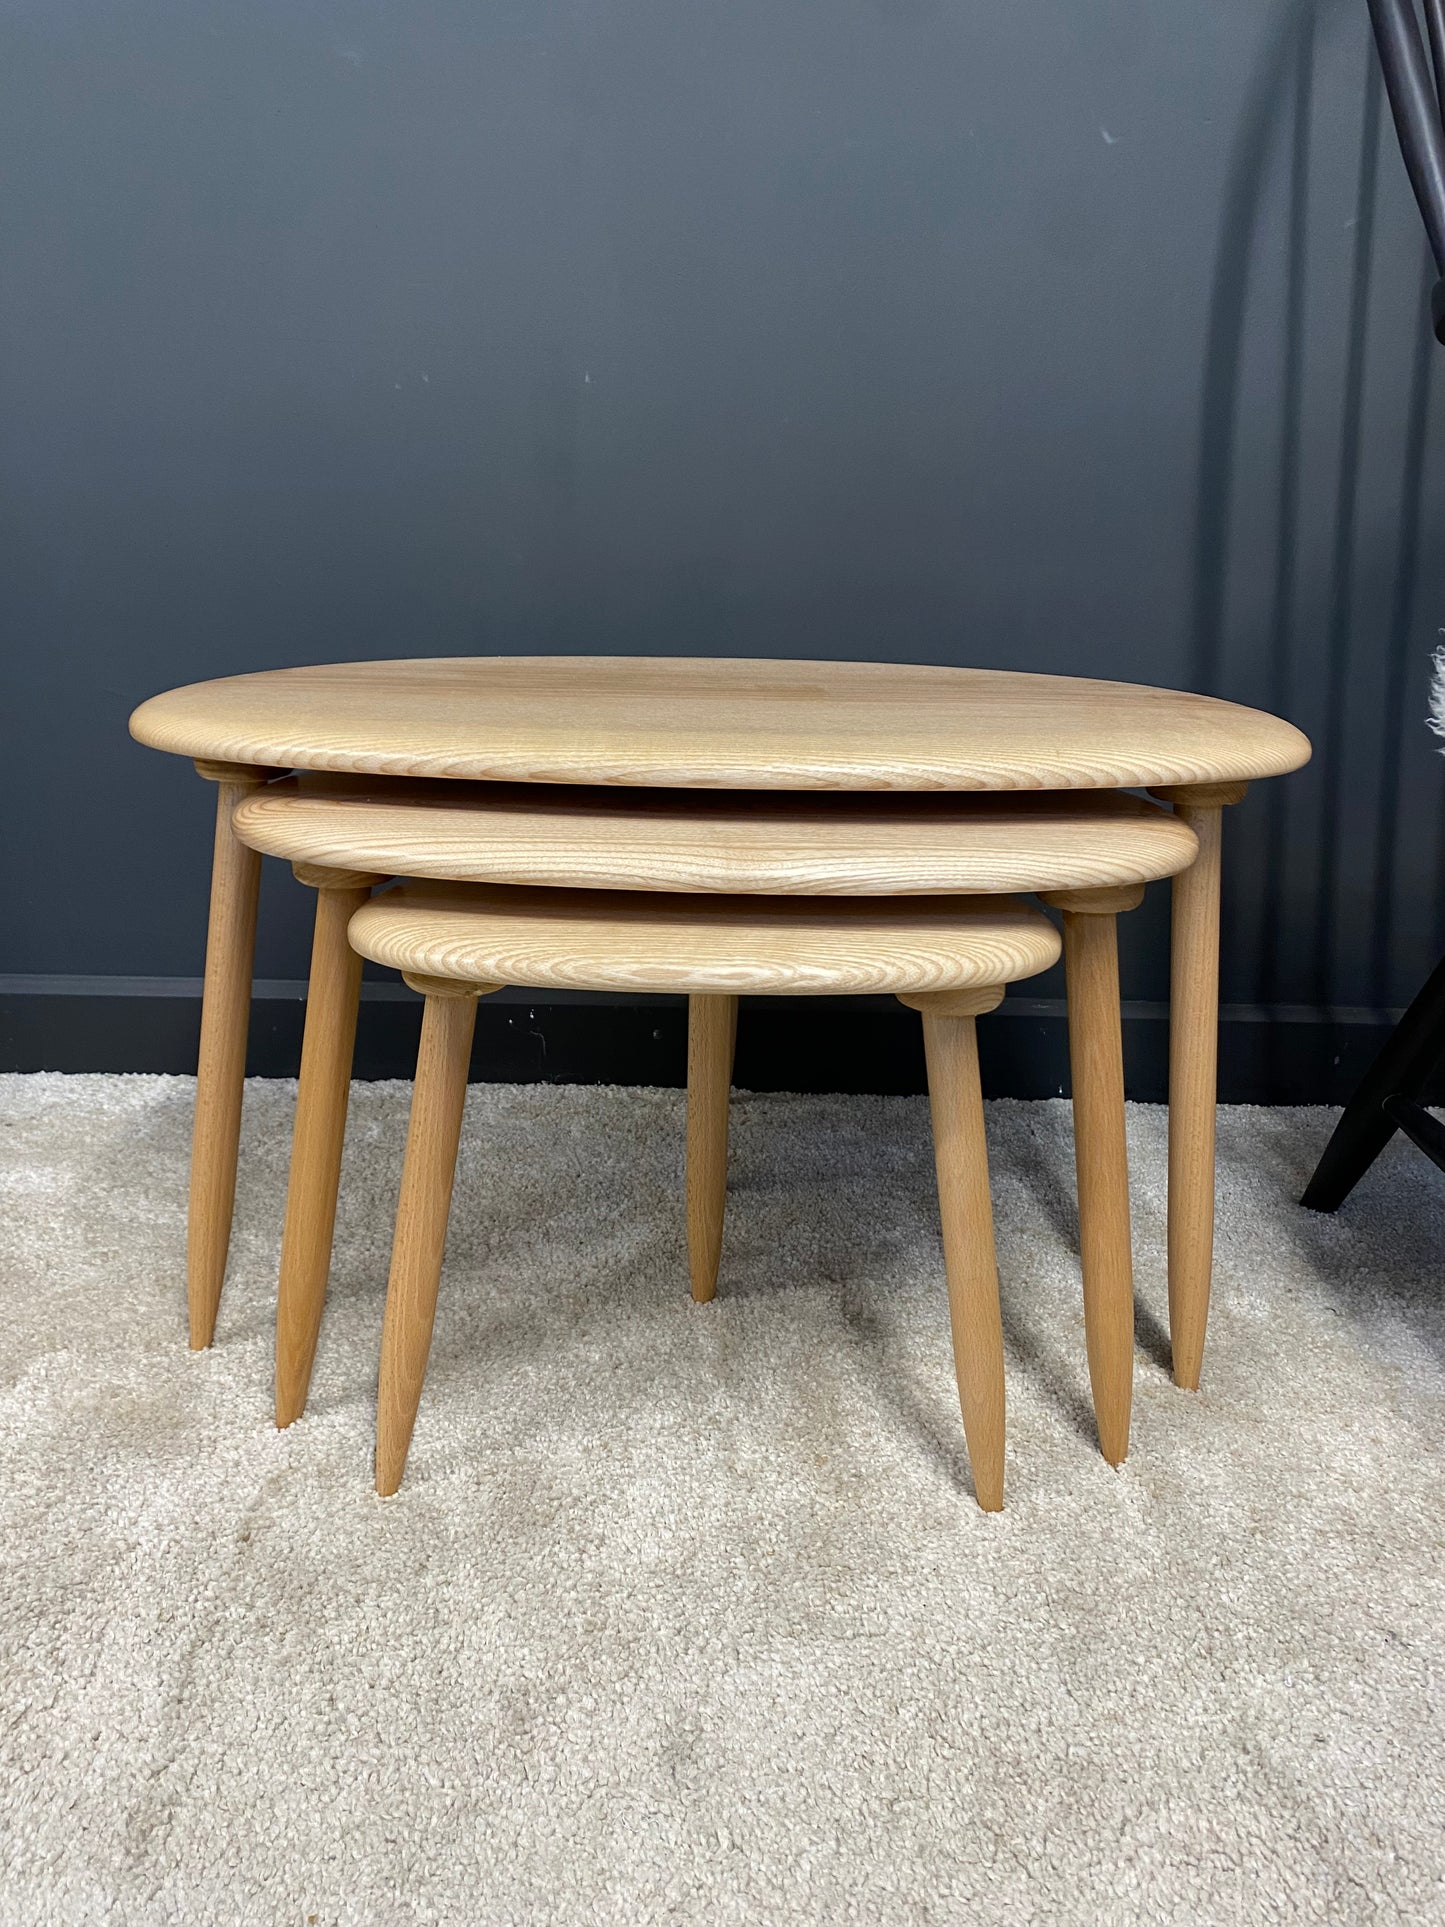 Handmade nest of tables in solid Ash